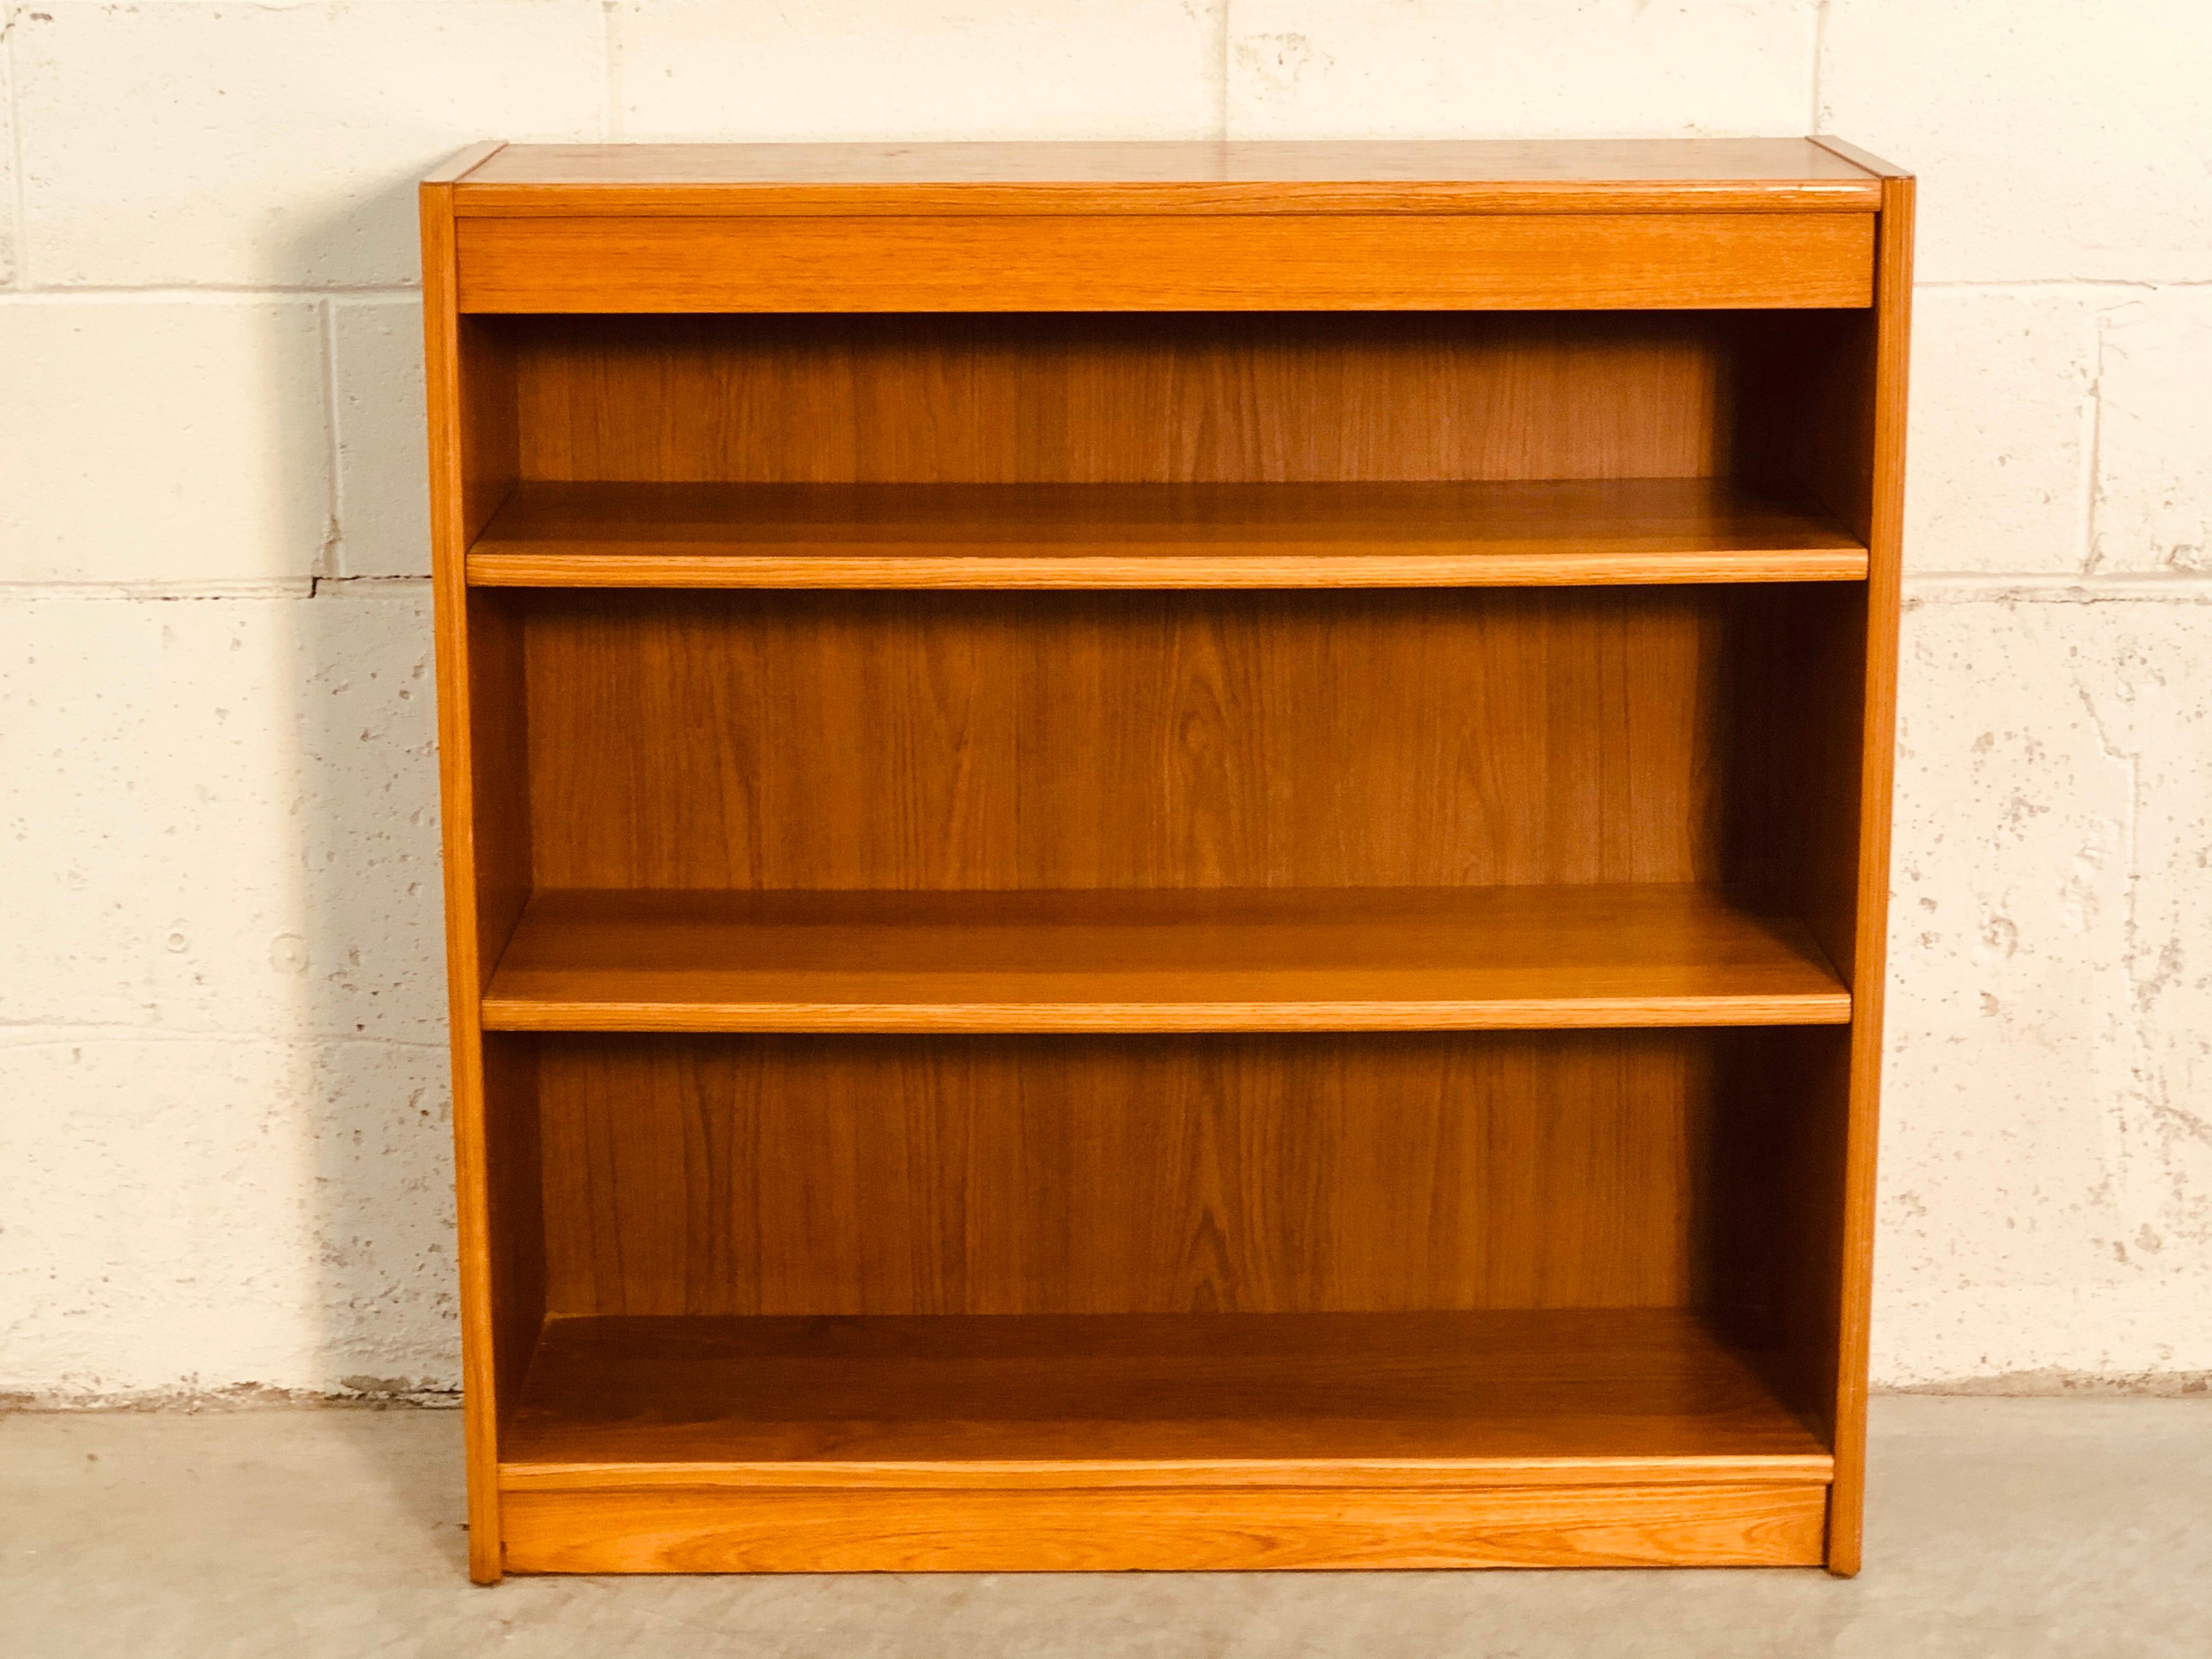 Vintage 1970s Danish teak bookcase with adjustable shelving. Great for storage and shelving can accomodate different options. Marked underneath.